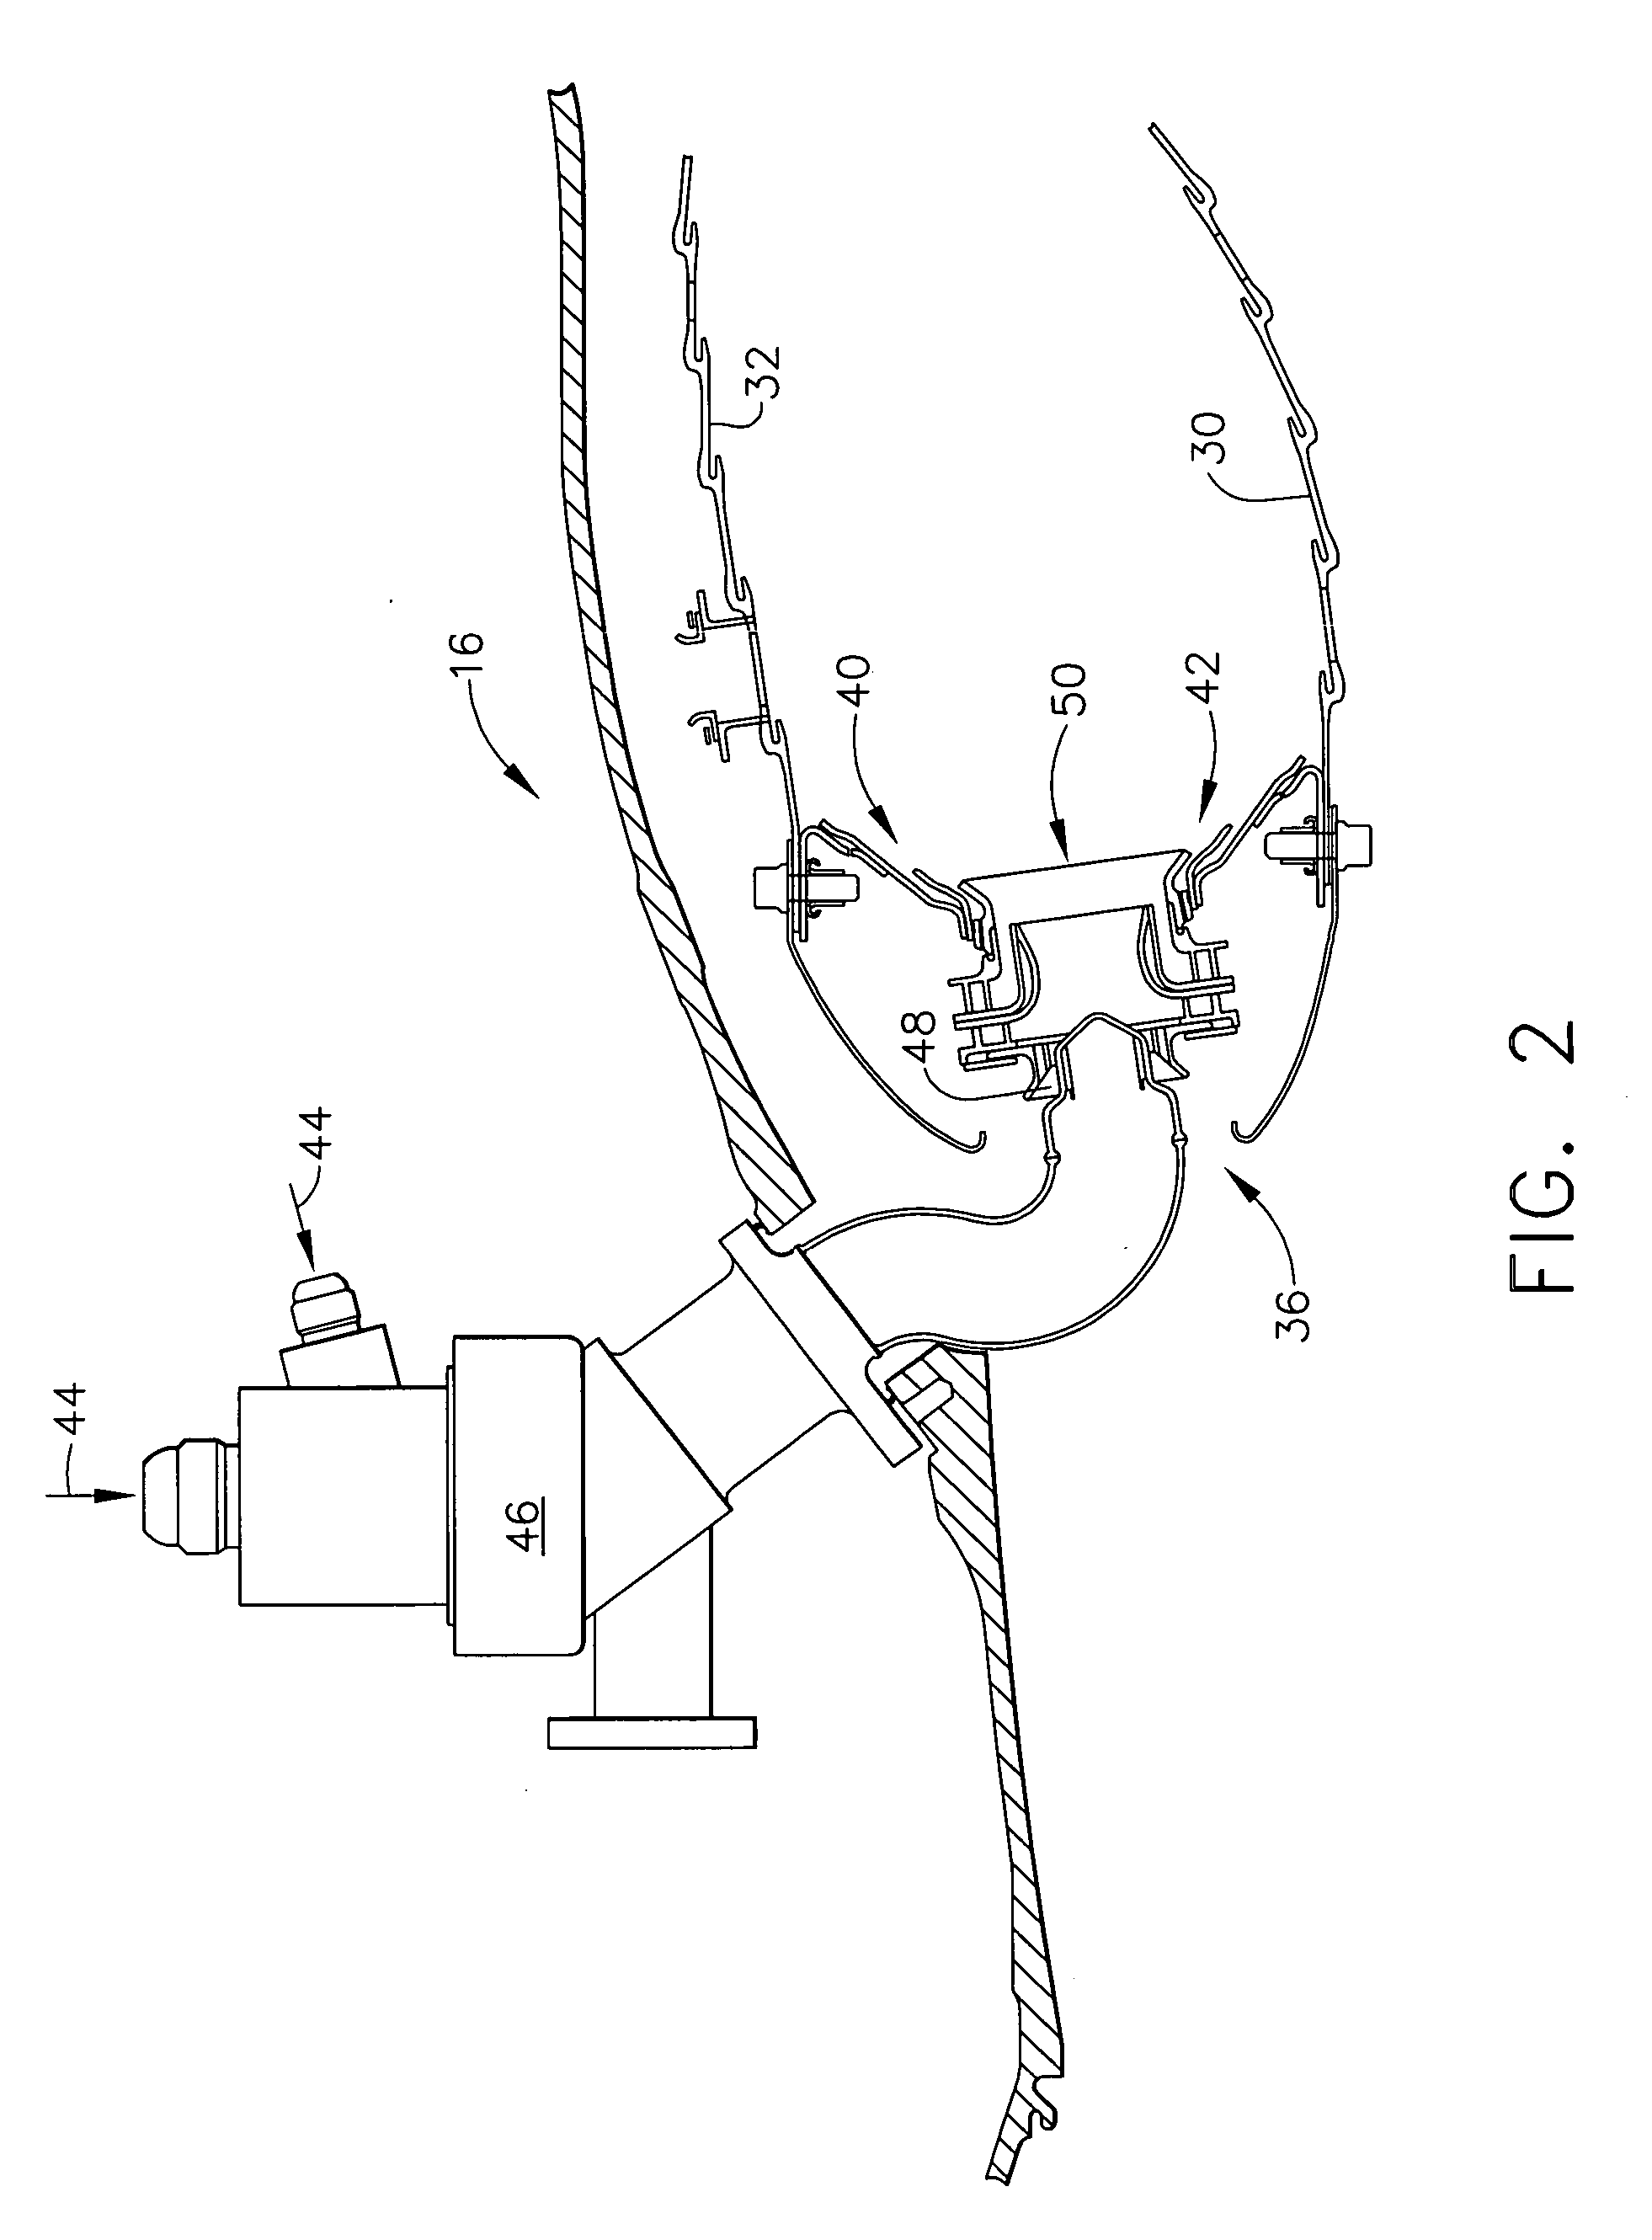 Fuel nozzle for gas turbine engines